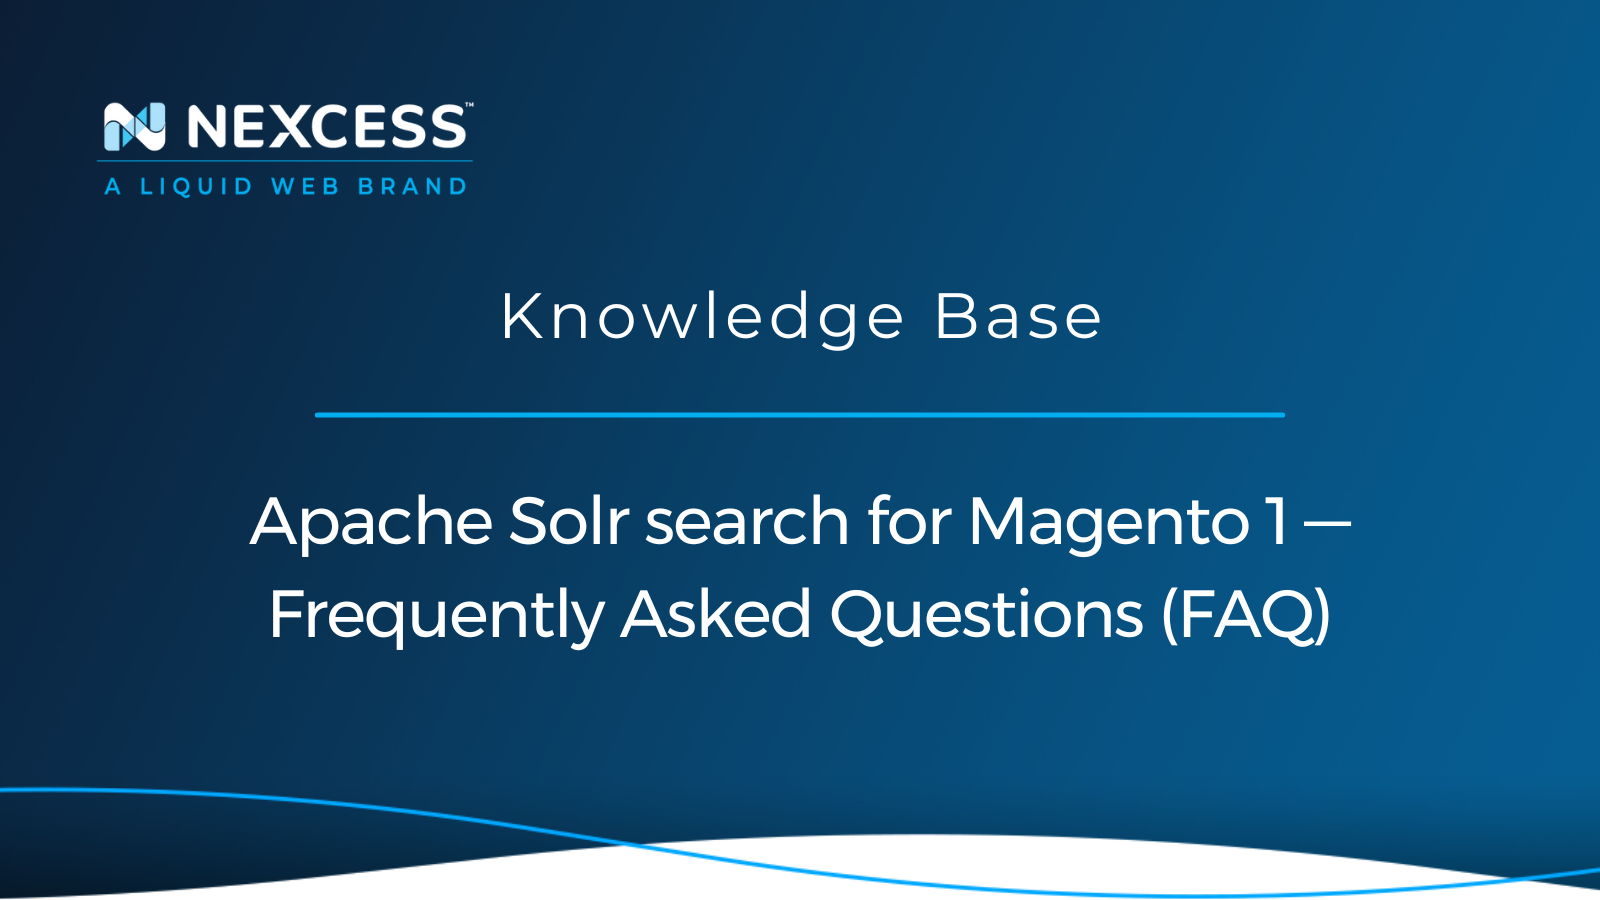 Apache Solr search for Magento 1 — Frequently Asked Questions (FAQ)